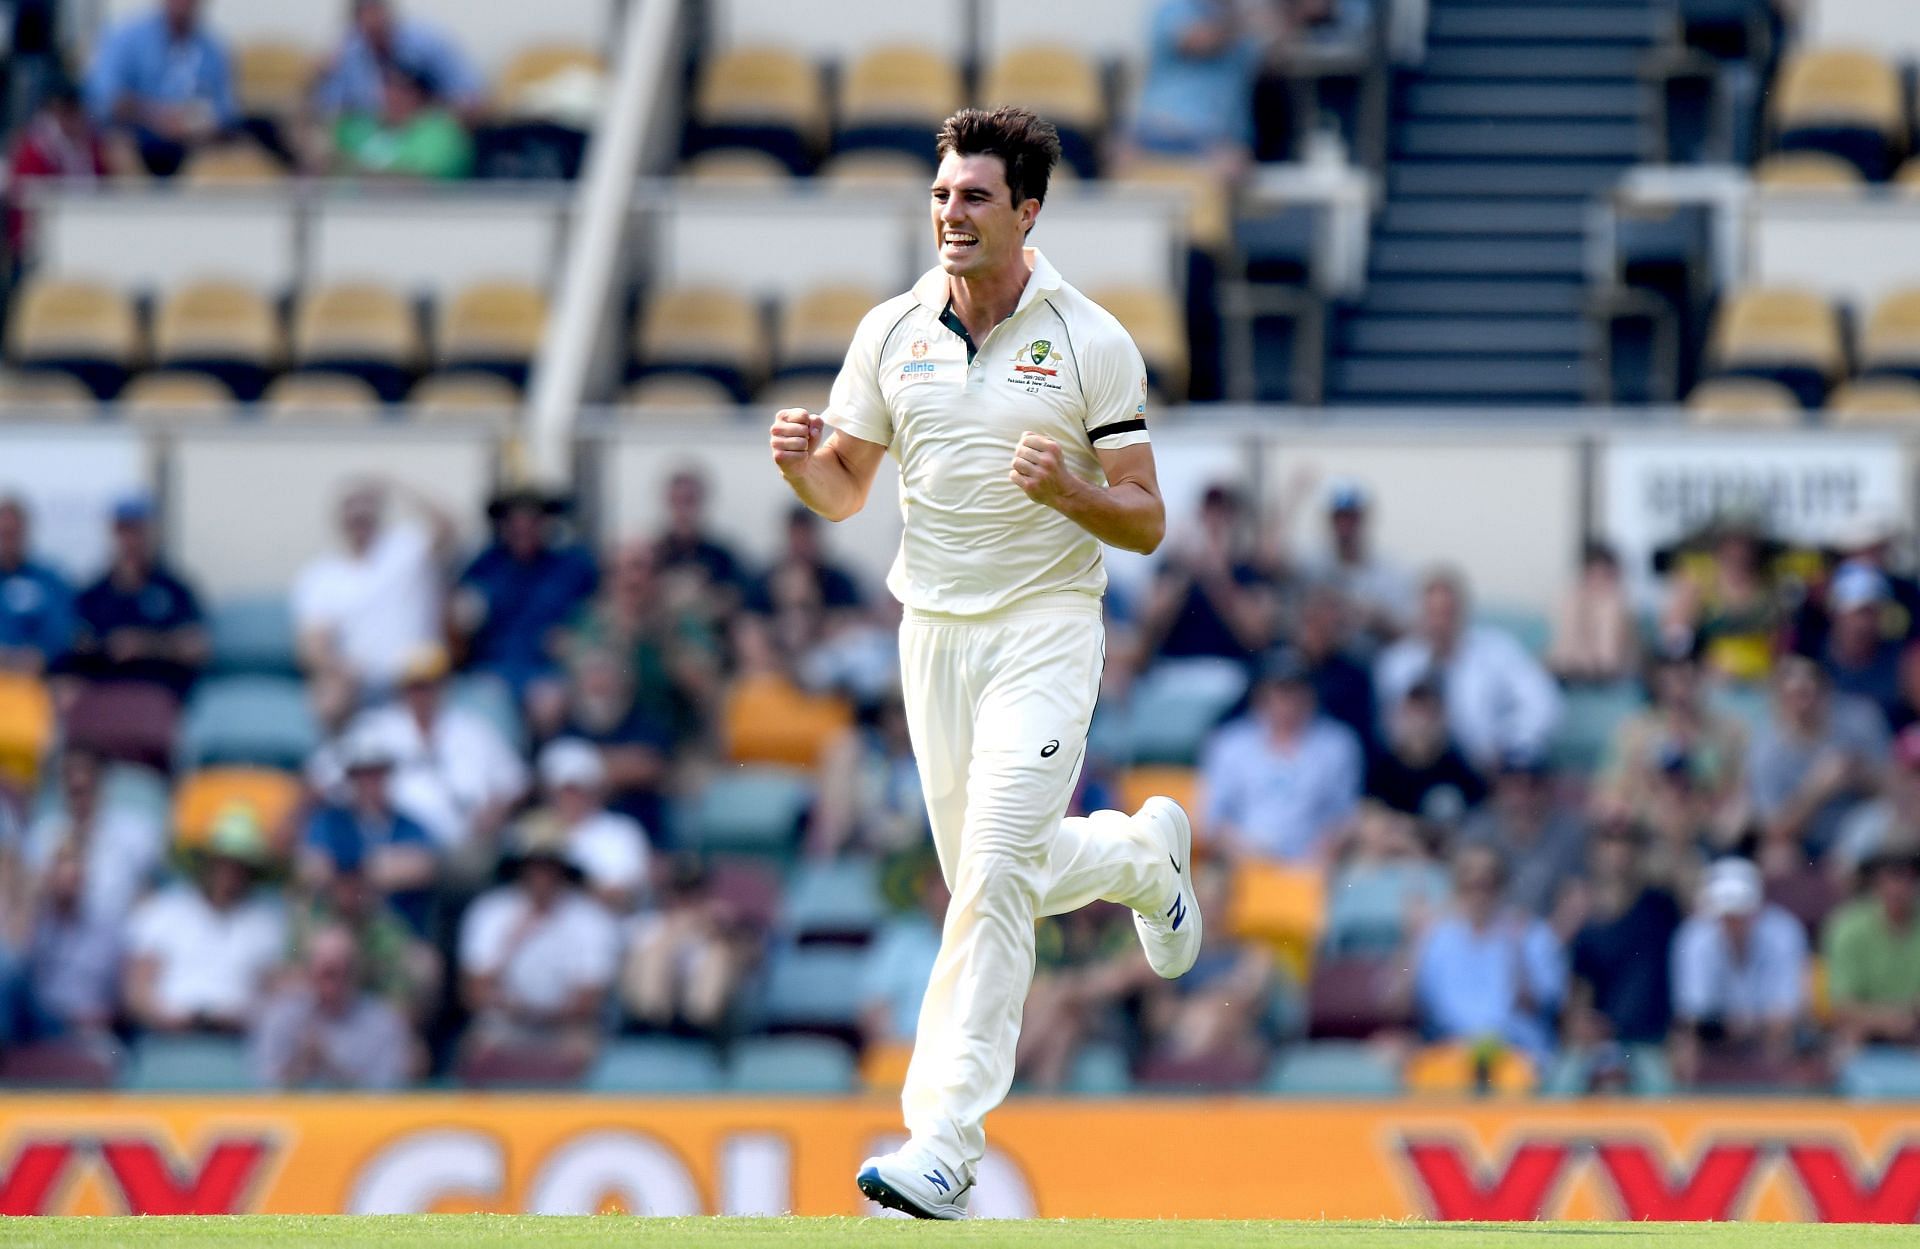 Pat Cummins bowled a stunning spell on Day 3 of the third Test to give his team a big lead (File photo)